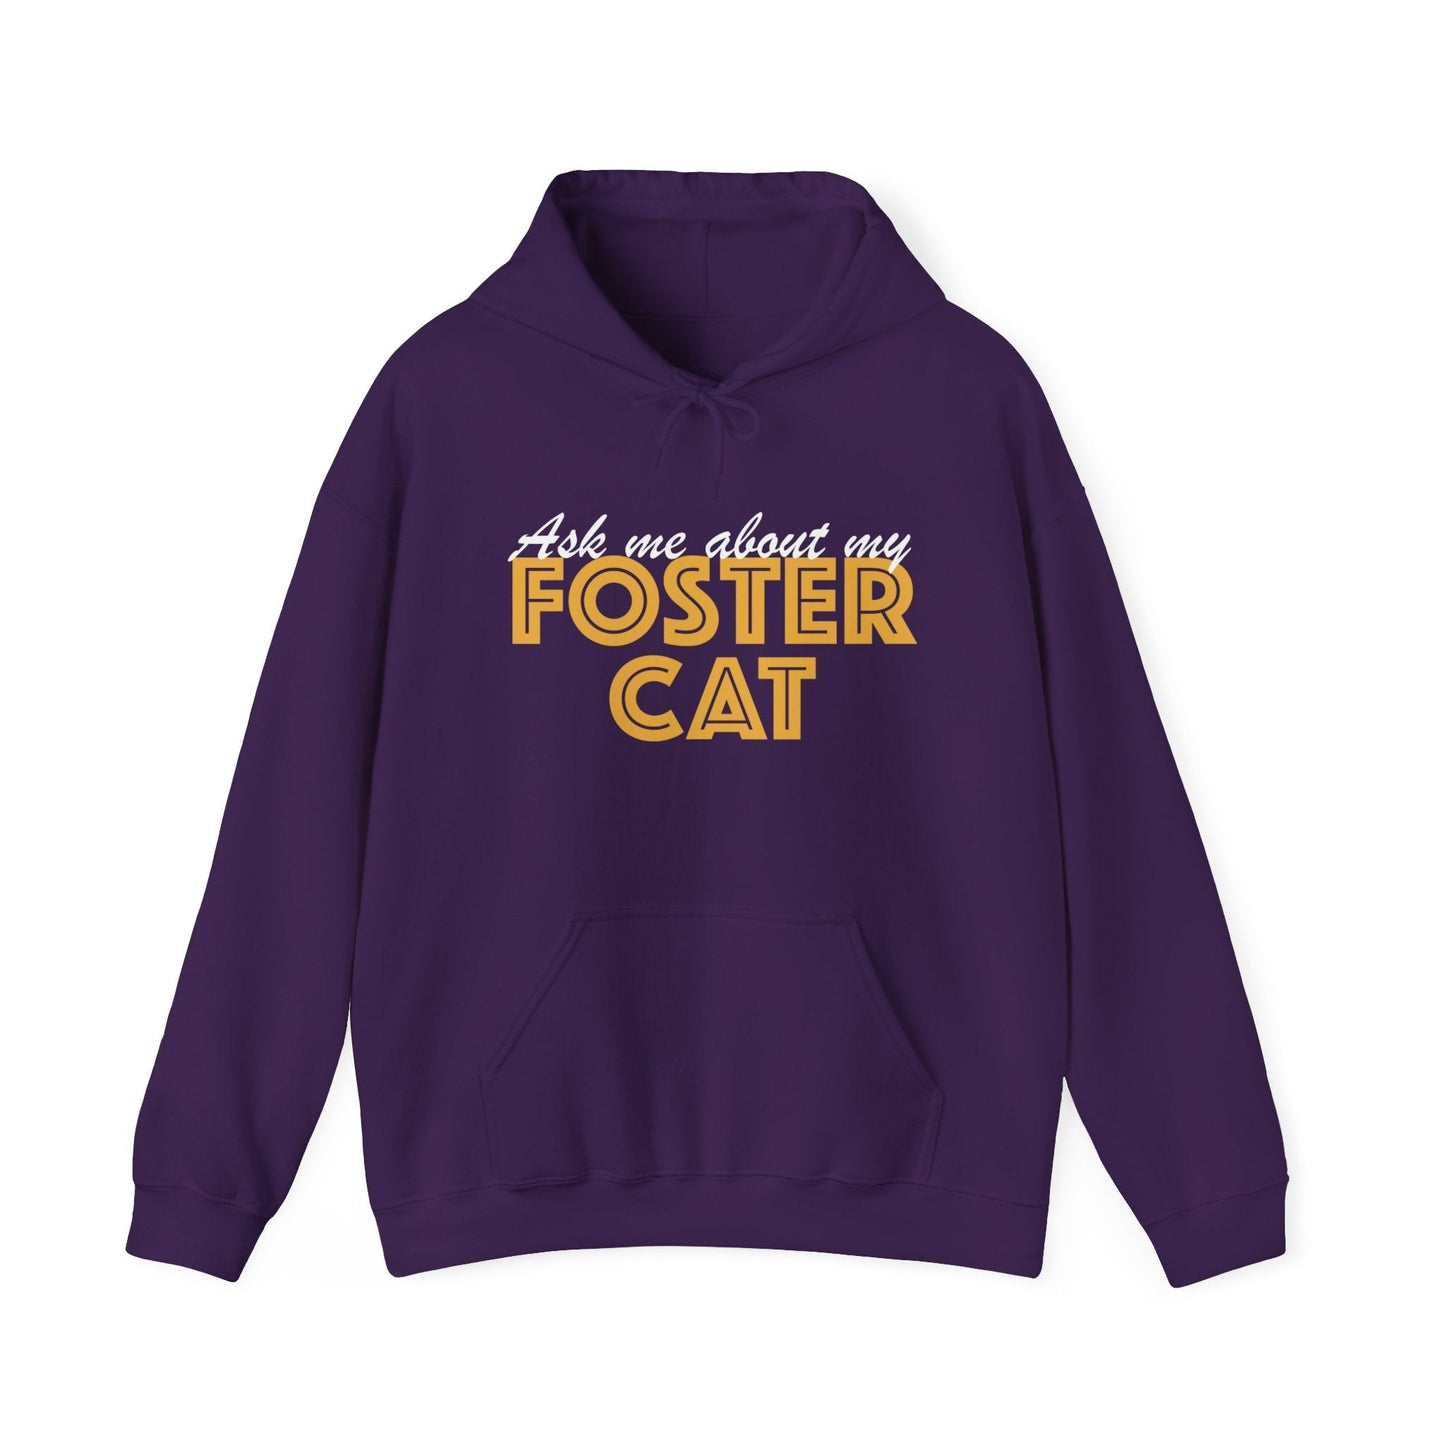 Ask Me About My Foster Cat | Hooded Sweatshirt - Detezi Designs-23294194320501061918